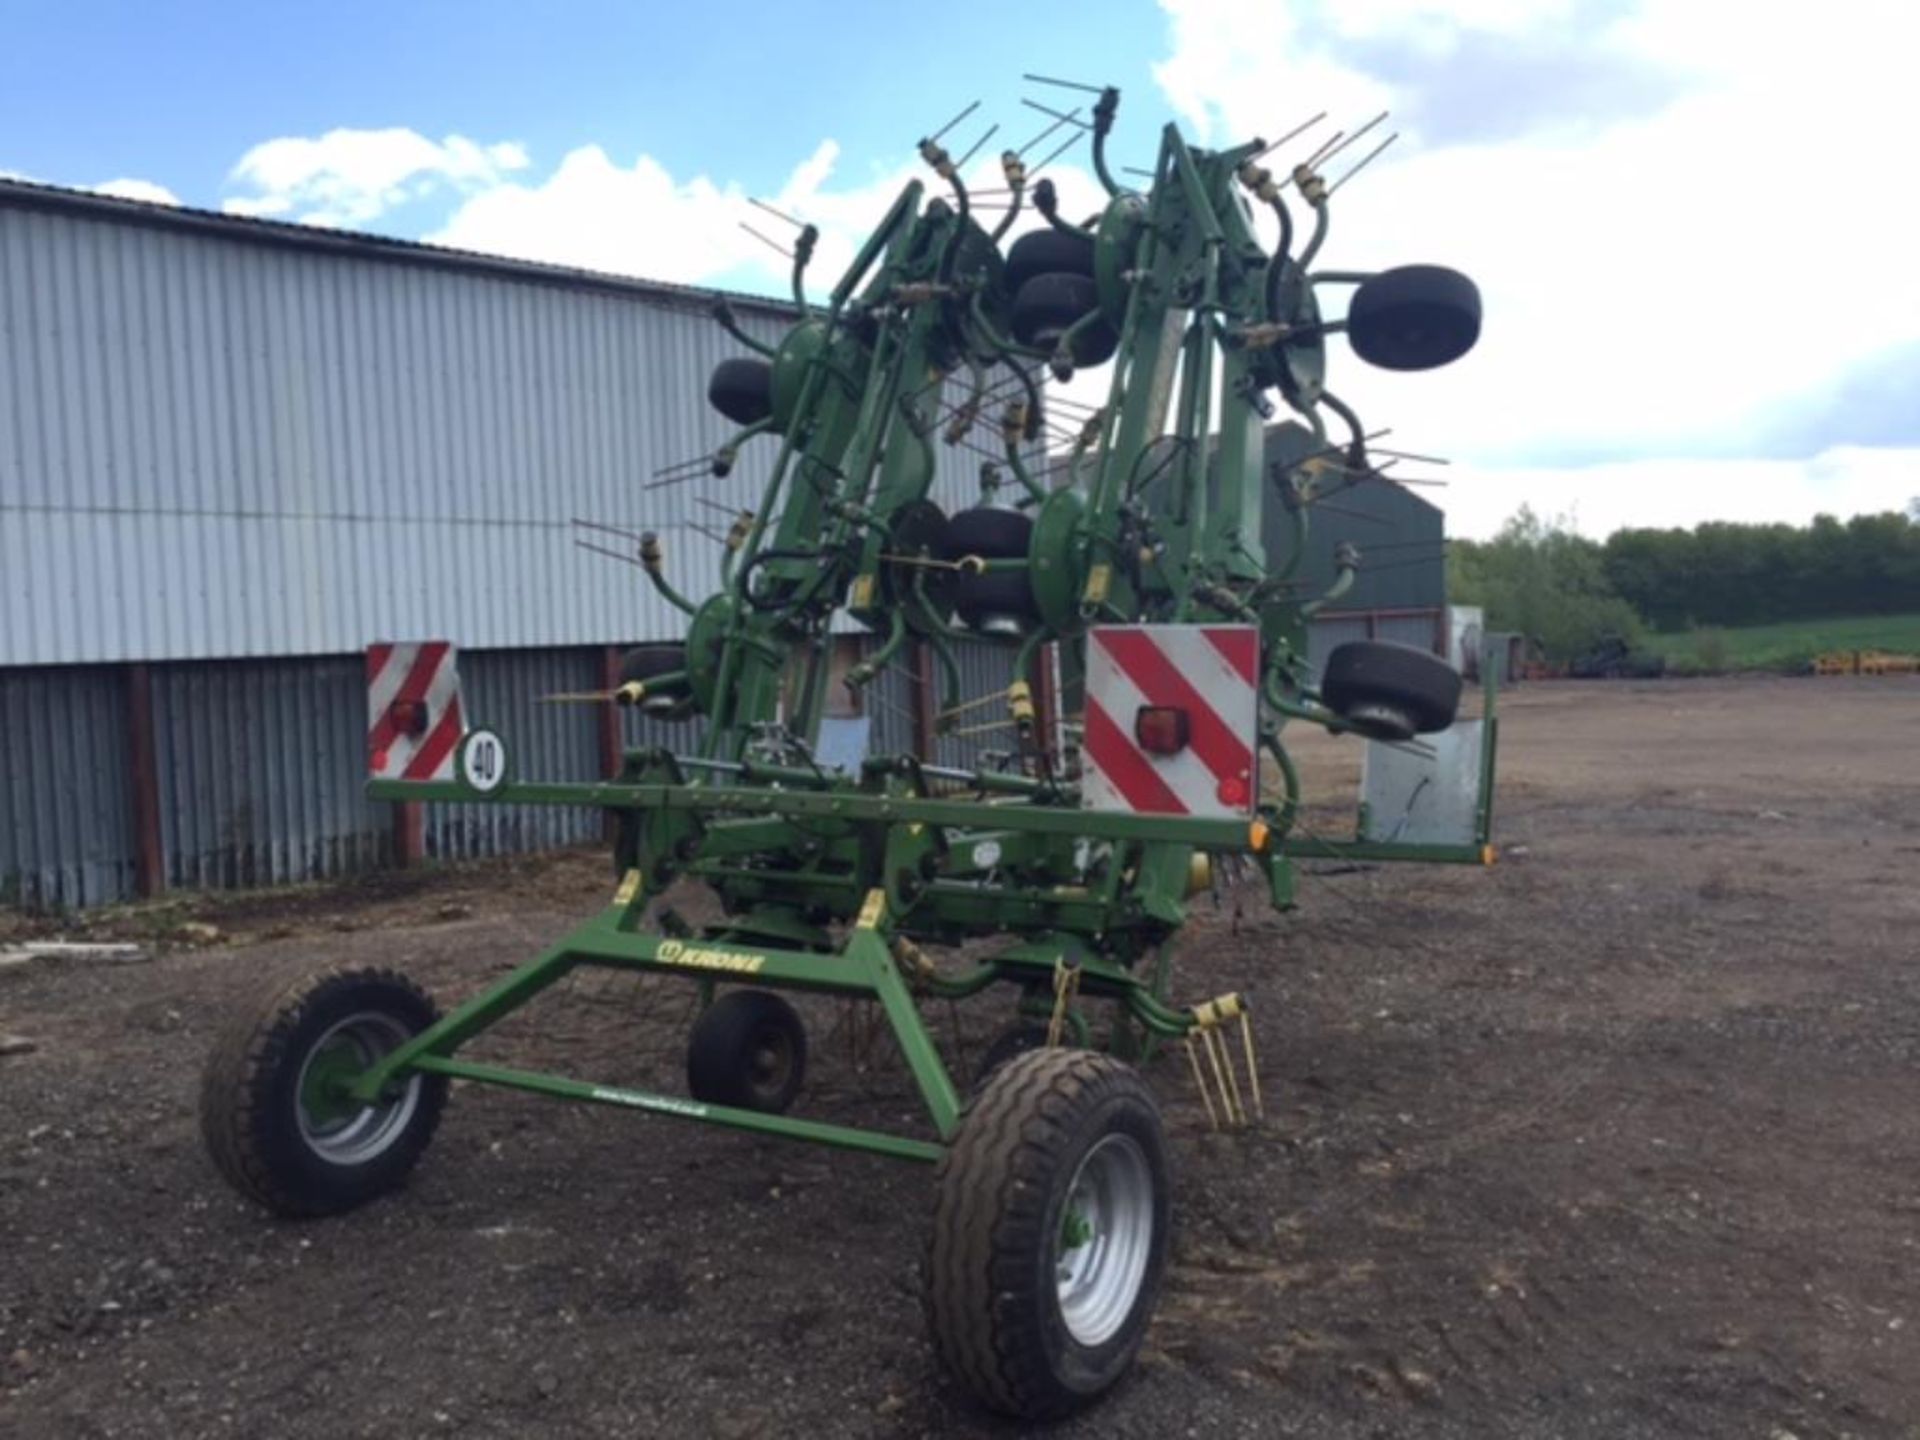 2013 Krone KWT 11.2/10 hay tedder. Stated to be in good working order. - Image 2 of 2